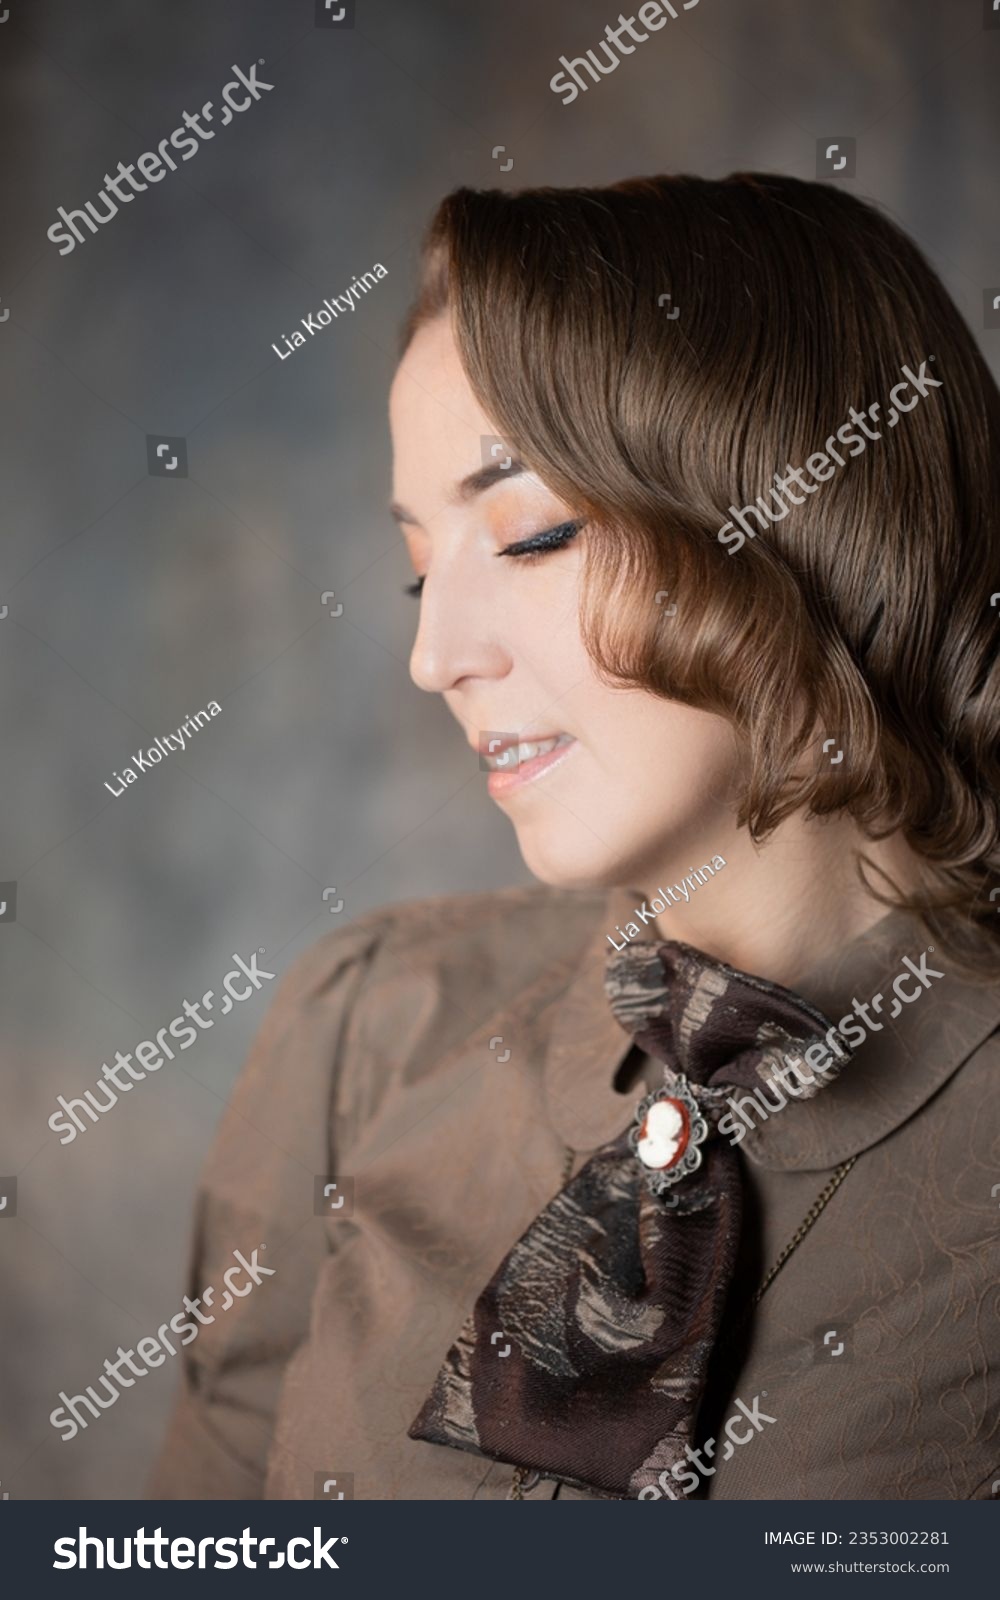 Stylish lady in an elegant suit in Victorian style, suit with steampunk elements, close-up portrait #2353002281